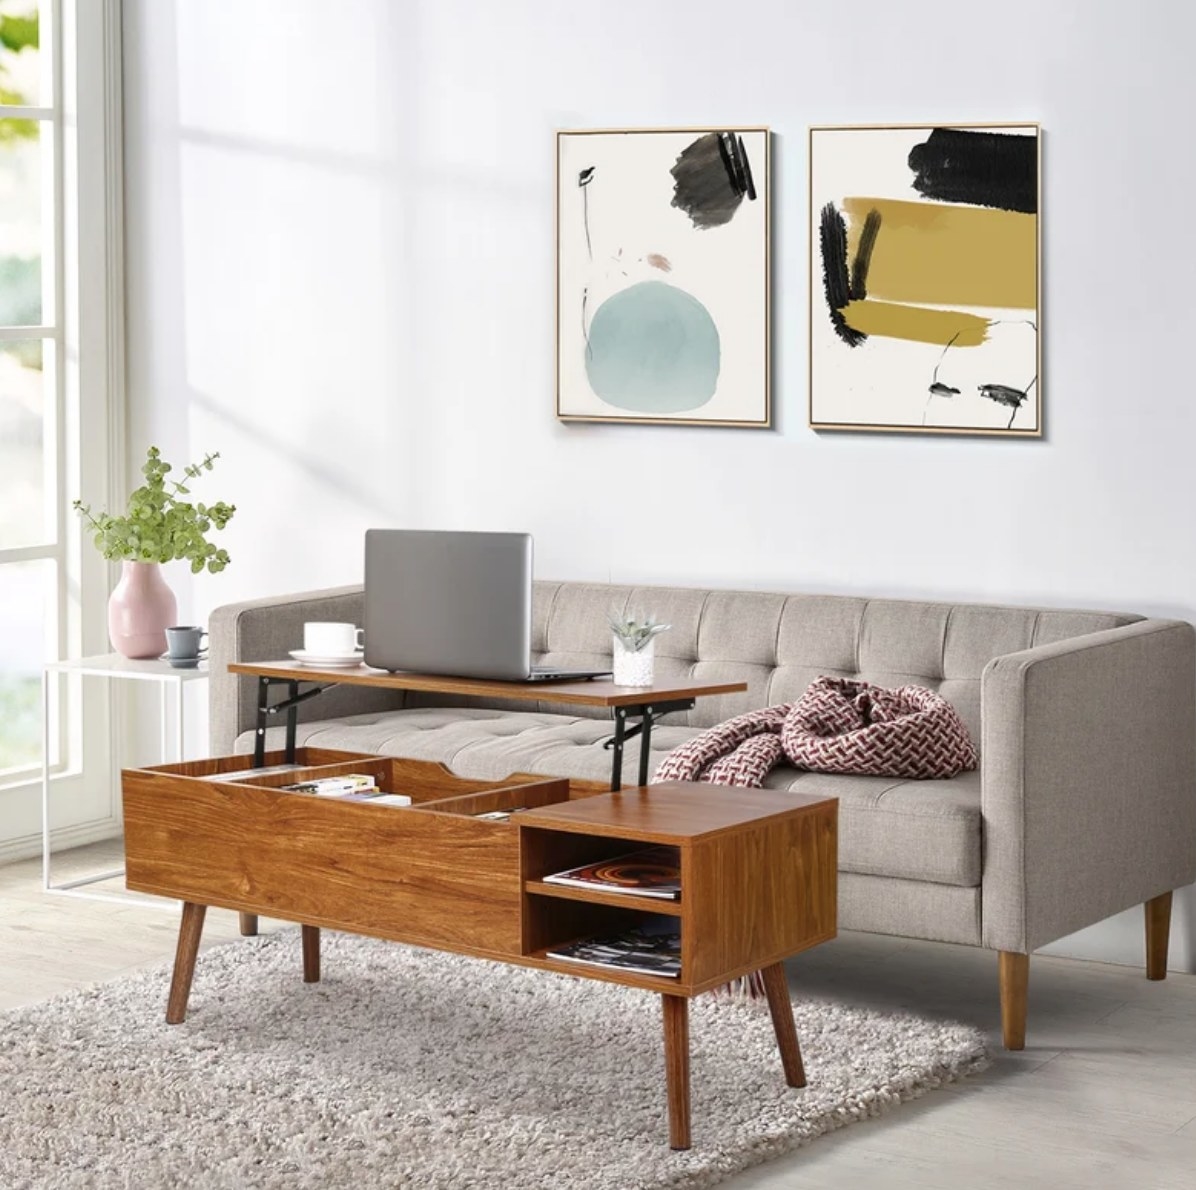 A brown lift-top coffee table